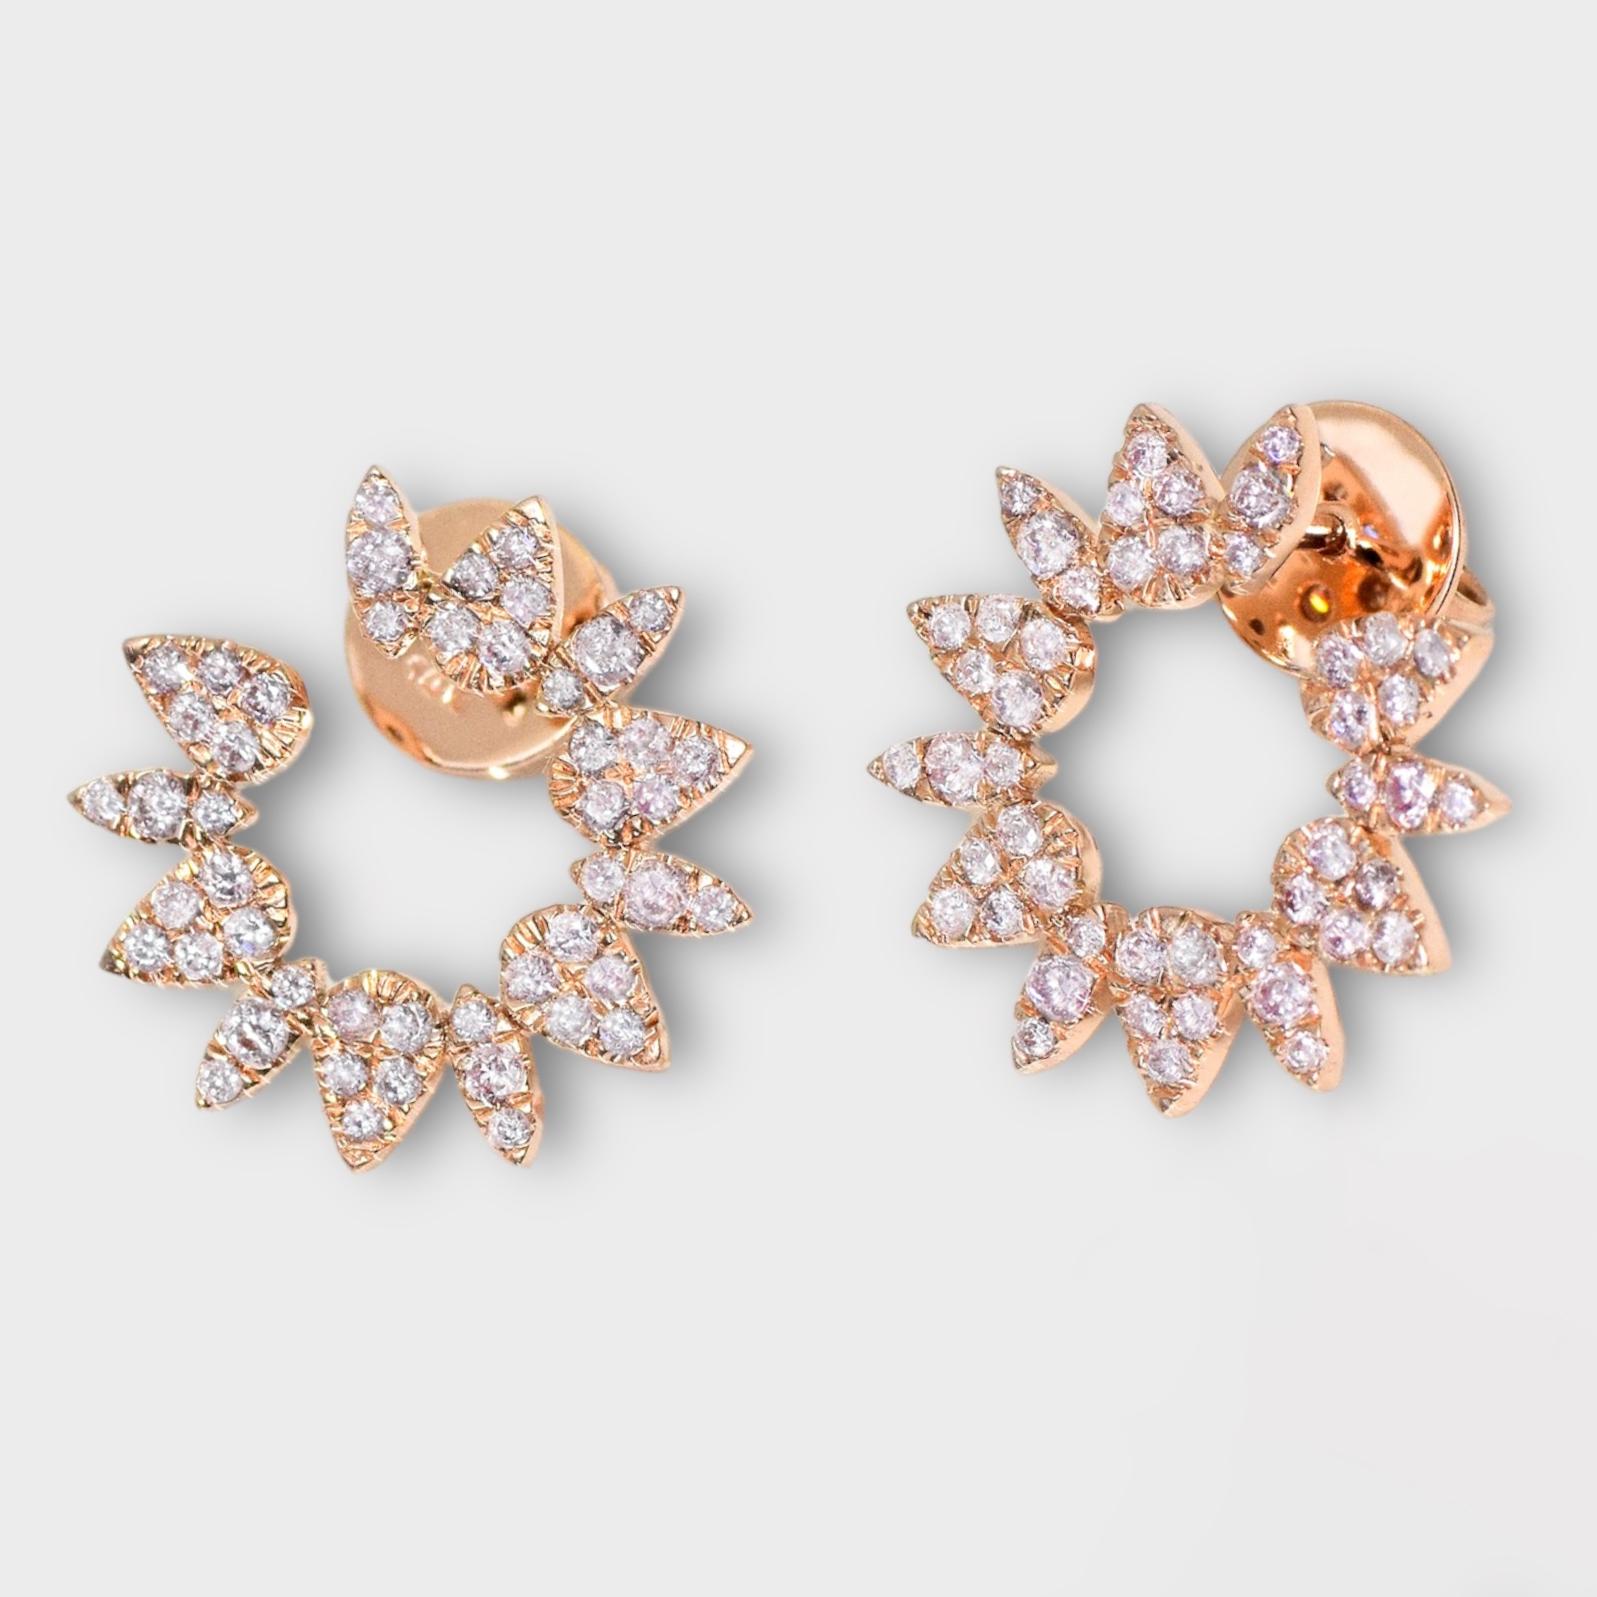 *IGI 14K 0.84 ct Natural Pink Diamonds Radiant Design Stud Earrings*

This band features a stunning design with a radiant crafted from 14K pink gold. It is set with natural pink diamonds weighing 0.84 carats.

These earrings feature colorful natural